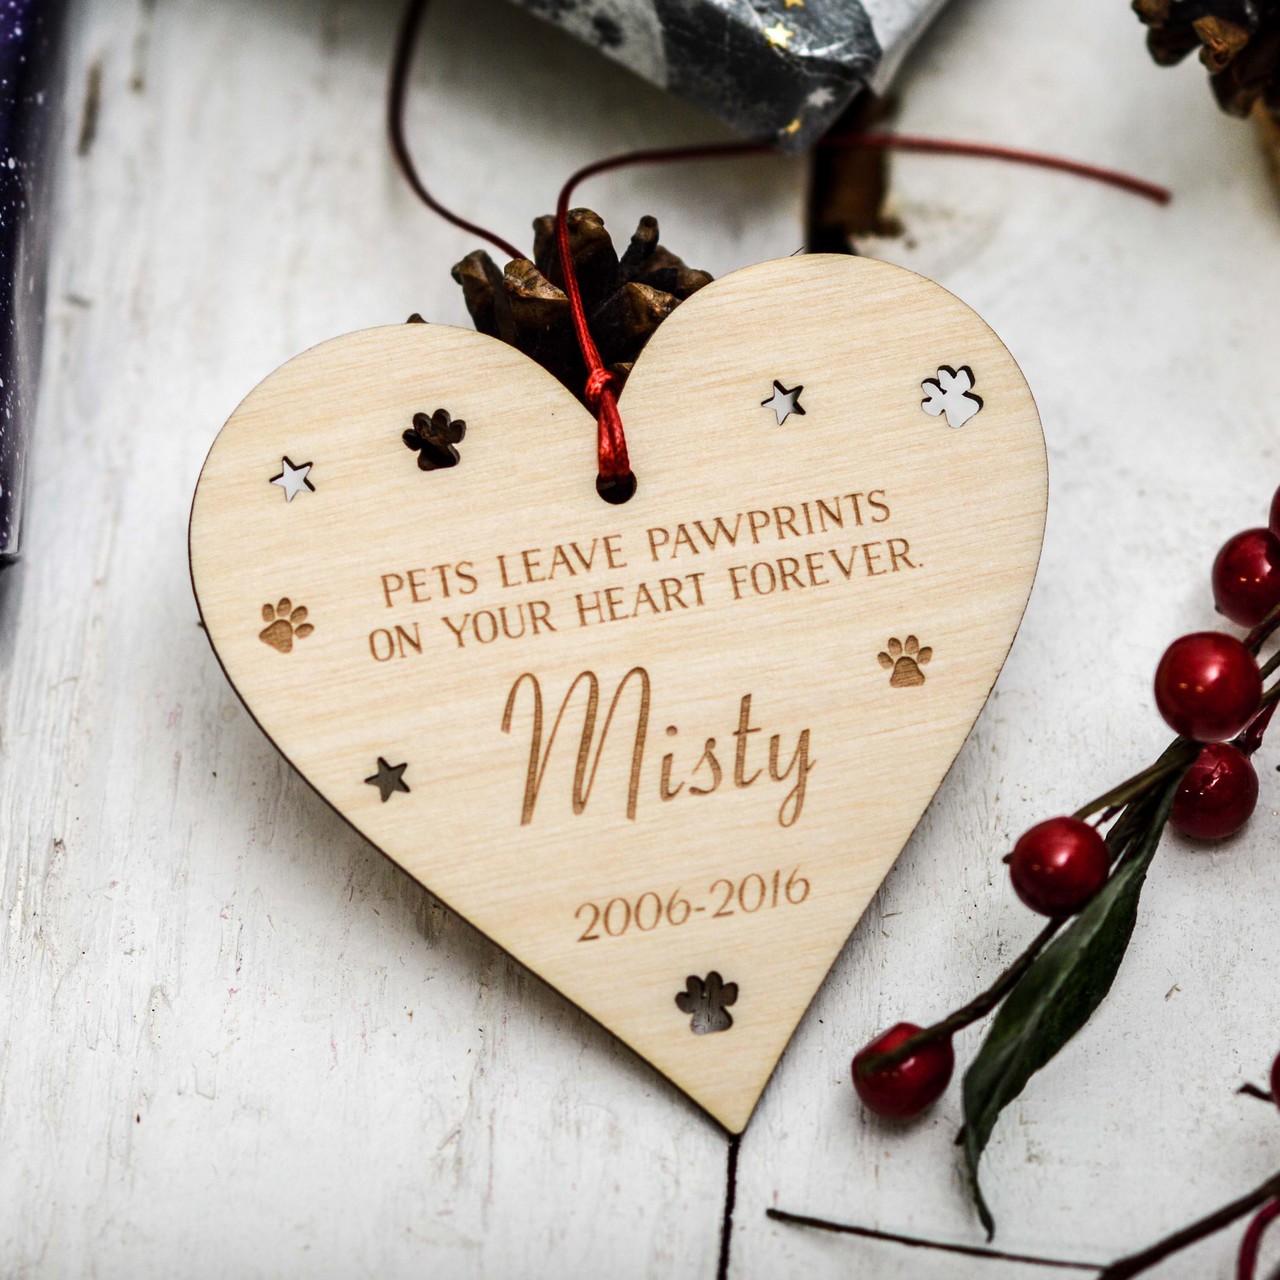 Personalised Pets leave pawprints on your heart forever Decoration